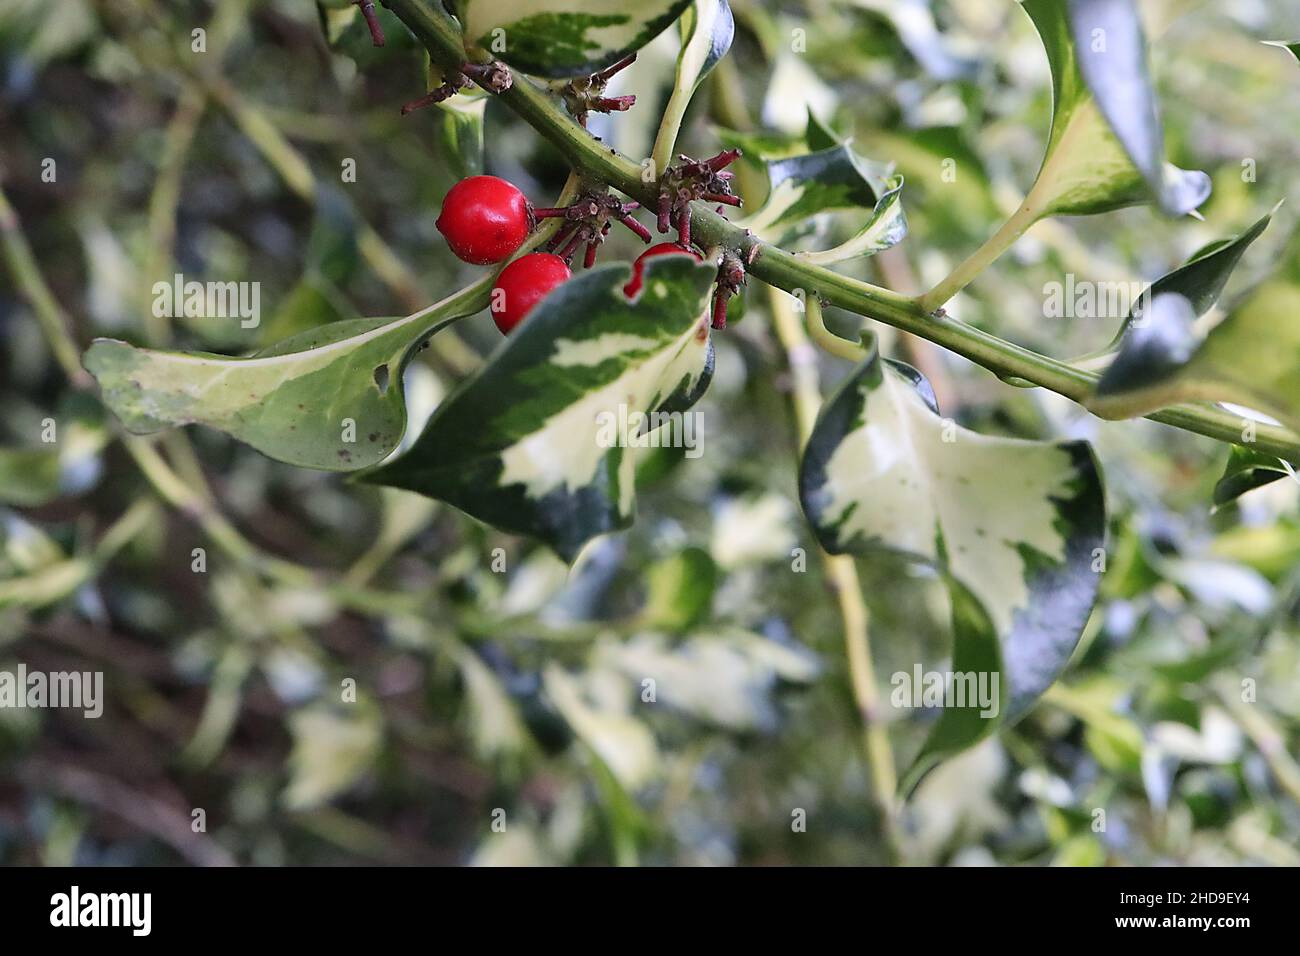 Ilex aquifolium ‘Silver Milkmaid’ Holly Silver Milkmaid – red berries and twisted variegated dark green leaves with central creamy white blotch,  UK Stock Photo